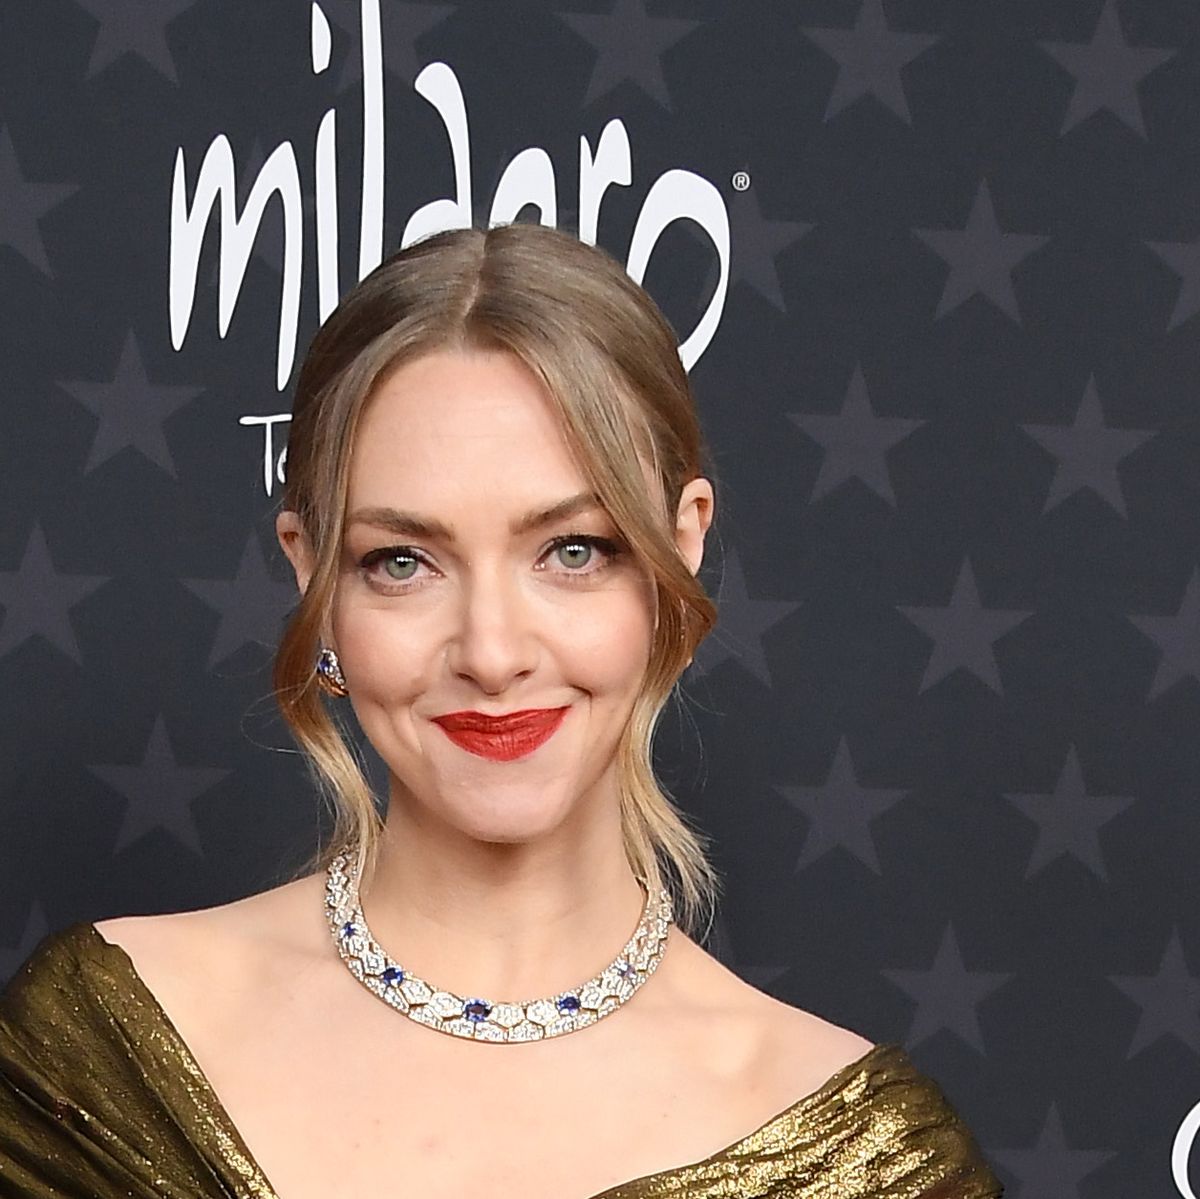 Amanda Seyfried Just Flaunted Her Abs in Daring Cut-Out Dress in New Photos